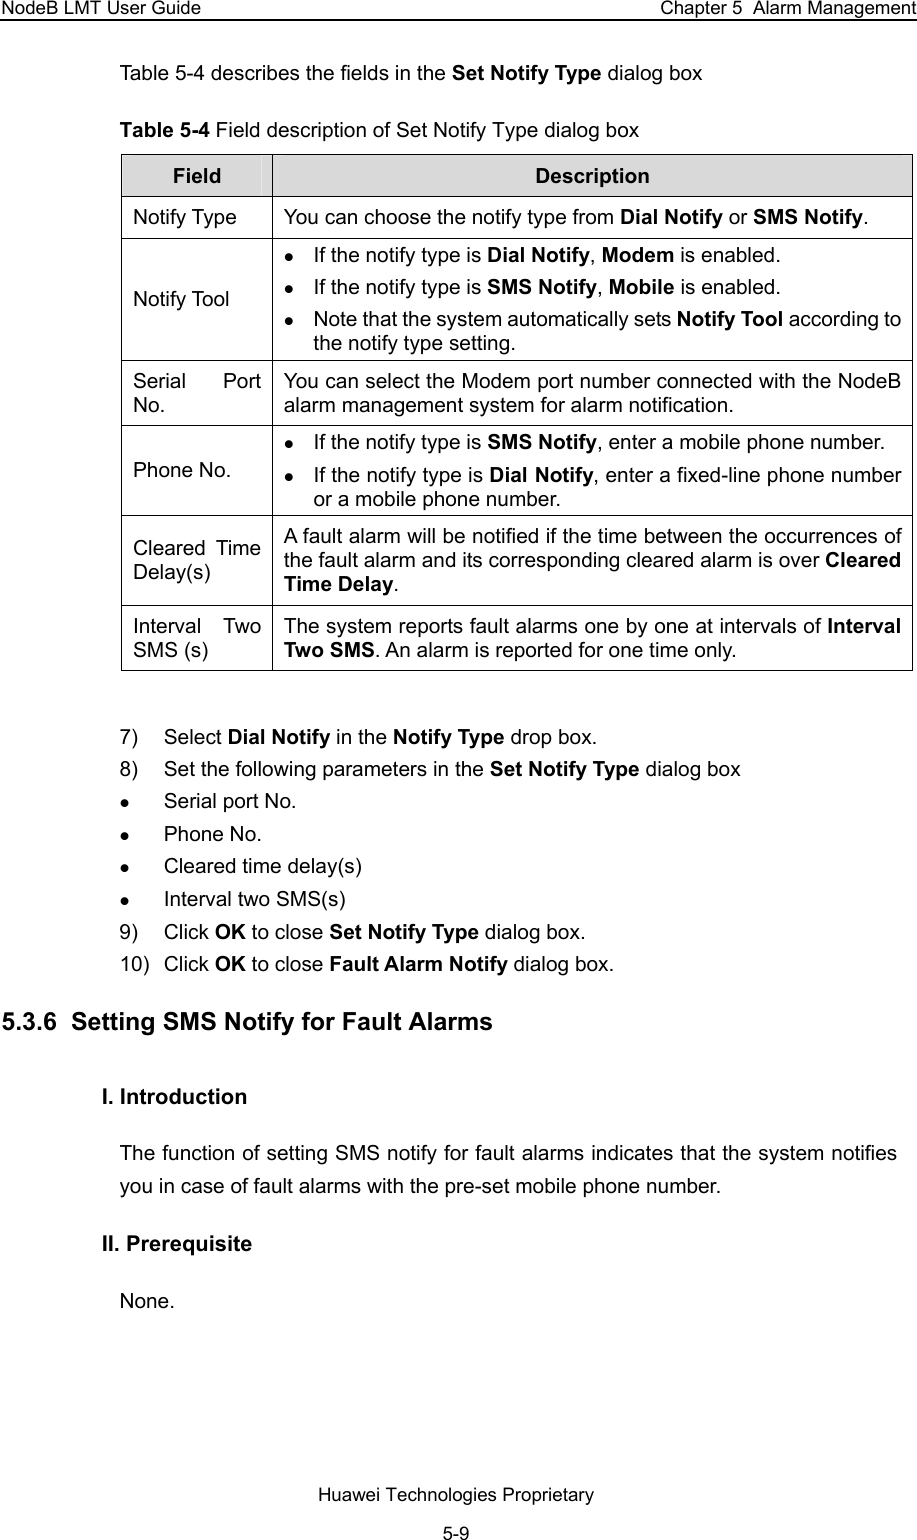 NodeB LMT User Guide  Chapter 5  Alarm Management Table 5-4 describes the fields in the Set Notify Type dialog box  Table 5-4 Field description of Set Notify Type dialog box  Field   Description  Notify Type   You can choose the notify type from Dial Notify or SMS Notify.  Notify Tool  z If the notify type is Dial Notify, Modem is enabled.  z If the notify type is SMS Notify, Mobile is enabled.  z Note that the system automatically sets Notify Tool according to the notify type setting.  Serial Port No.  You can select the Modem port number connected with the NodeB alarm management system for alarm notification.  Phone No.  z If the notify type is SMS Notify, enter a mobile phone number. z If the notify type is Dial Notify, enter a fixed-line phone number or a mobile phone number.  Cleared Time Delay(s) A fault alarm will be notified if the time between the occurrences of the fault alarm and its corresponding cleared alarm is over Cleared Time Delay.  Interval Two SMS (s)  The system reports fault alarms one by one at intervals of Interval Two SMS. An alarm is reported for one time only.   7) Select Dial Notify in the Notify Type drop box.  8)  Set the following parameters in the Set Notify Type dialog box z Serial port No. z Phone No. z Cleared time delay(s)  z Interval two SMS(s)   9) Click OK to close Set Notify Type dialog box.  10) Click OK to close Fault Alarm Notify dialog box.  5.3.6  Setting SMS Notify for Fault Alarms  I. Introduction The function of setting SMS notify for fault alarms indicates that the system notifies you in case of fault alarms with the pre-set mobile phone number.  II. Prerequisite None.  Huawei Technologies Proprietary 5-9 